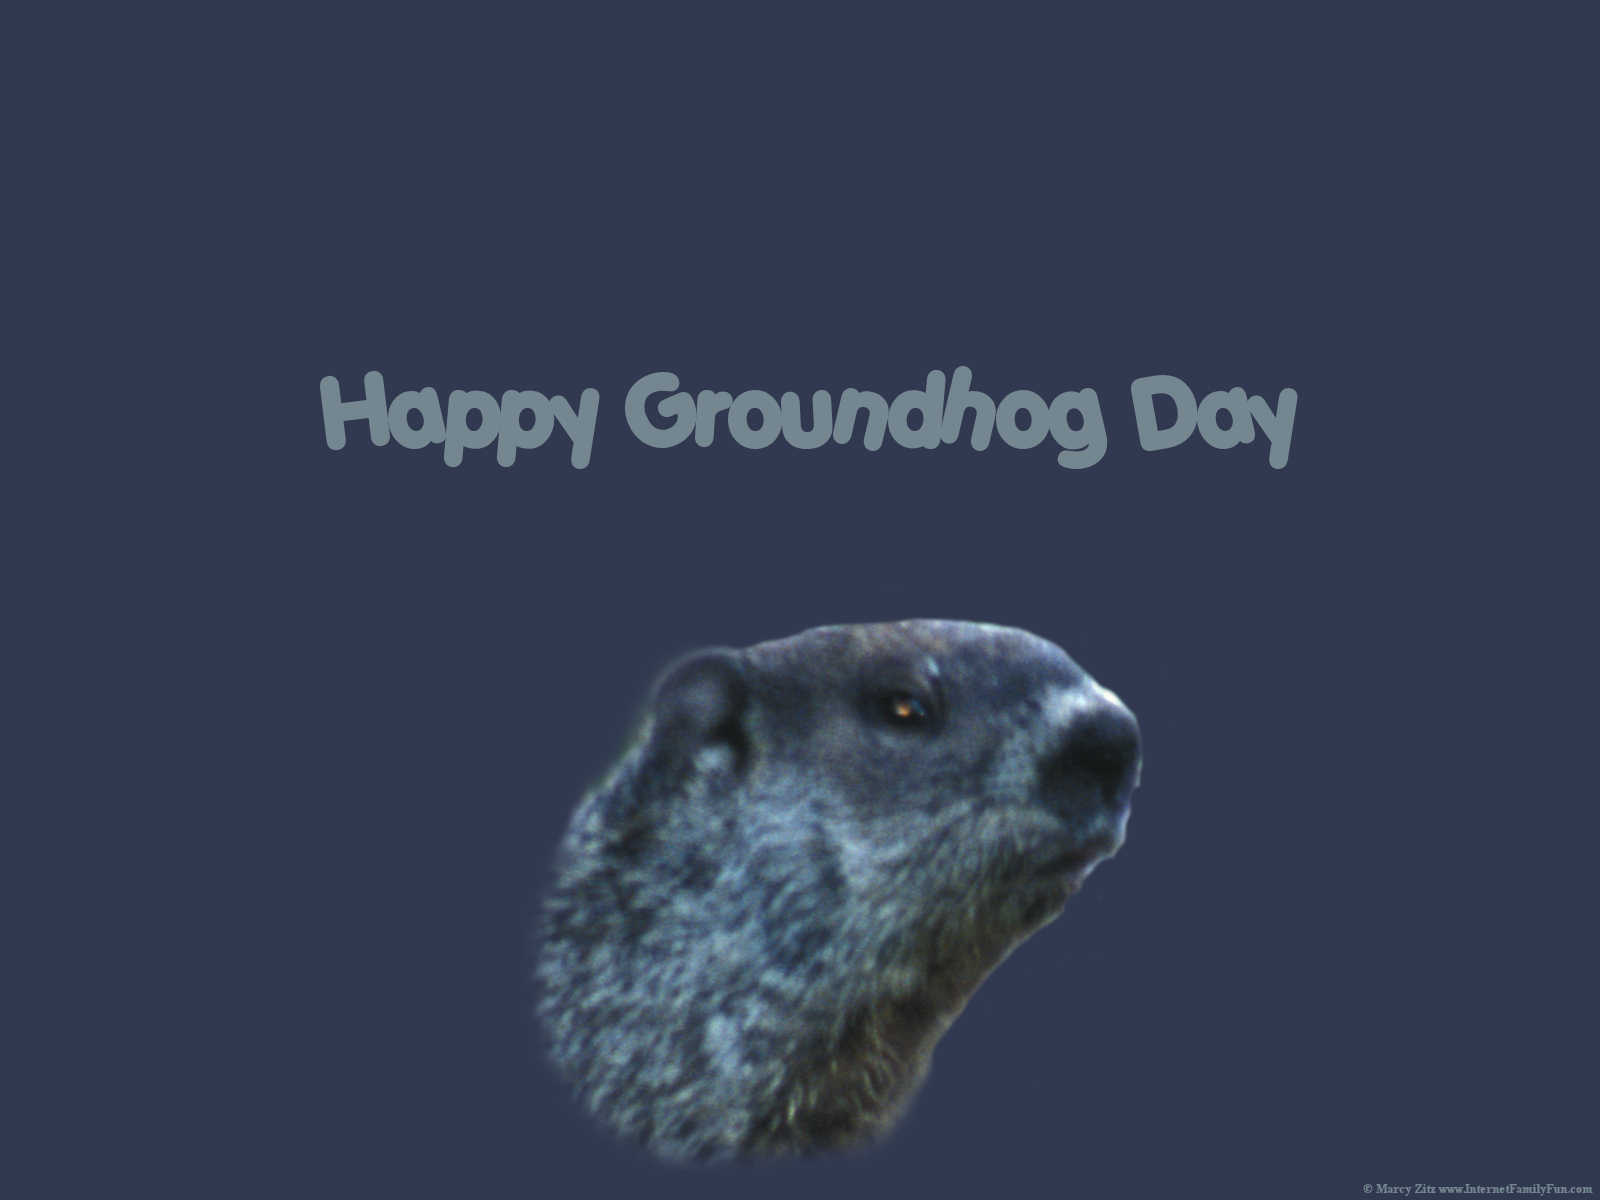 Groundhog Day Wallpaper Background for Desktop with Happy